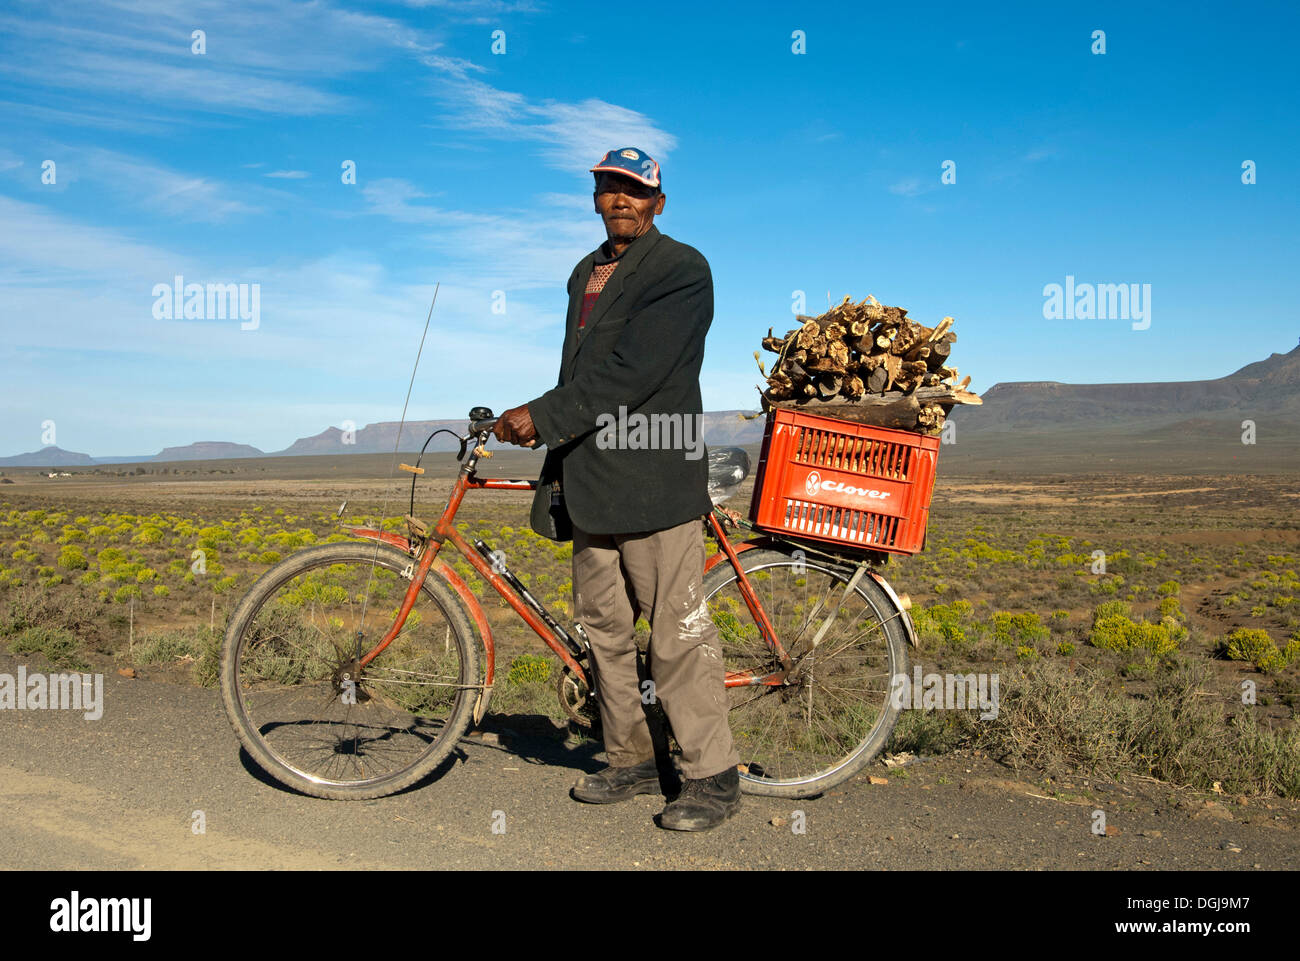 Local man with a bicycle and a box of firewood on the luggage rack, near Calvinia, Northern Cape Province, South Africa, Africa Stock Photo